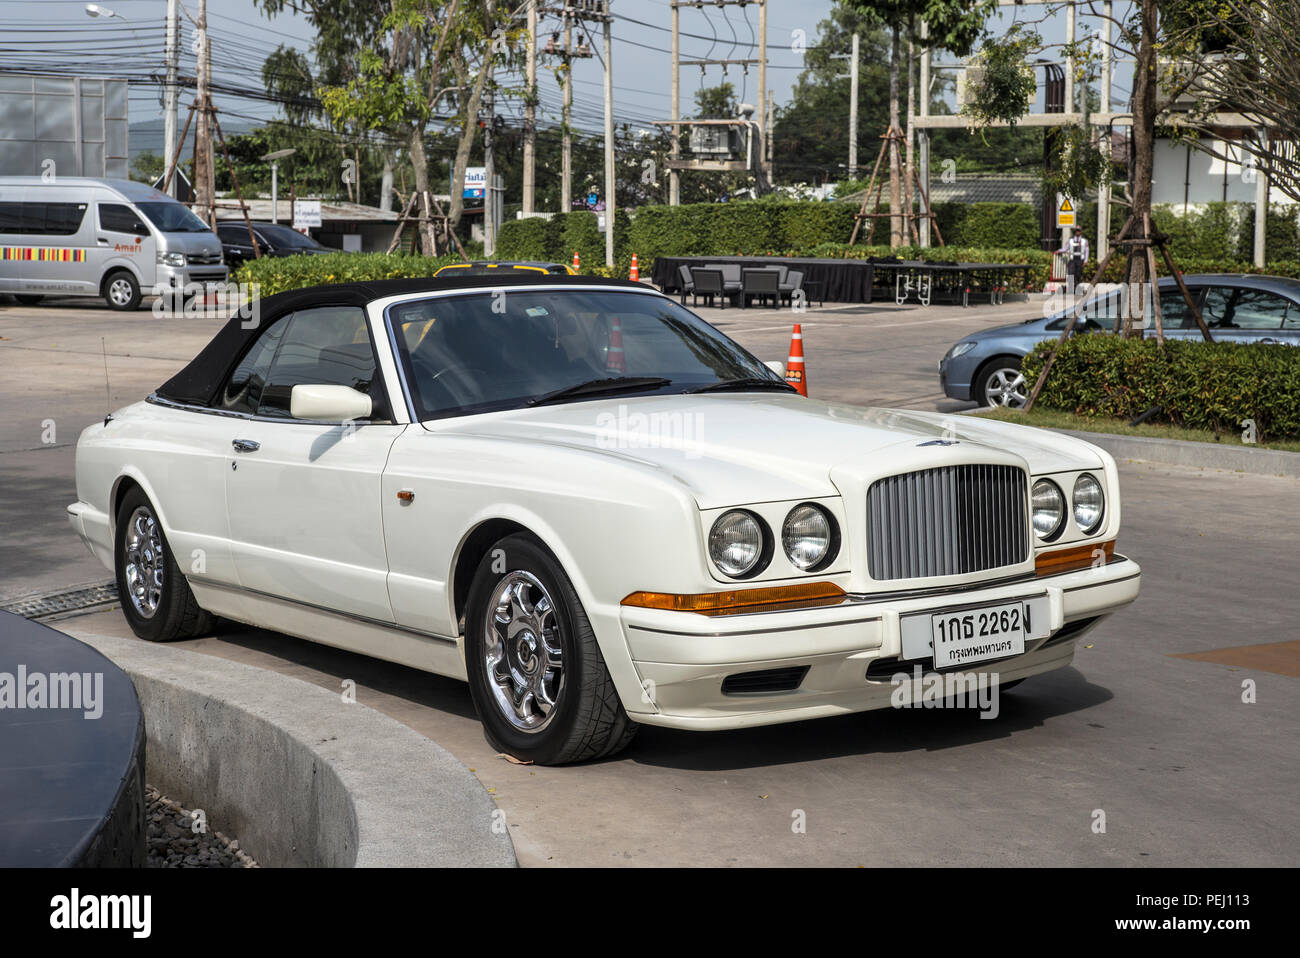 Bentley Azure luxury limousine UK car with Thailand number plate Stock Photo